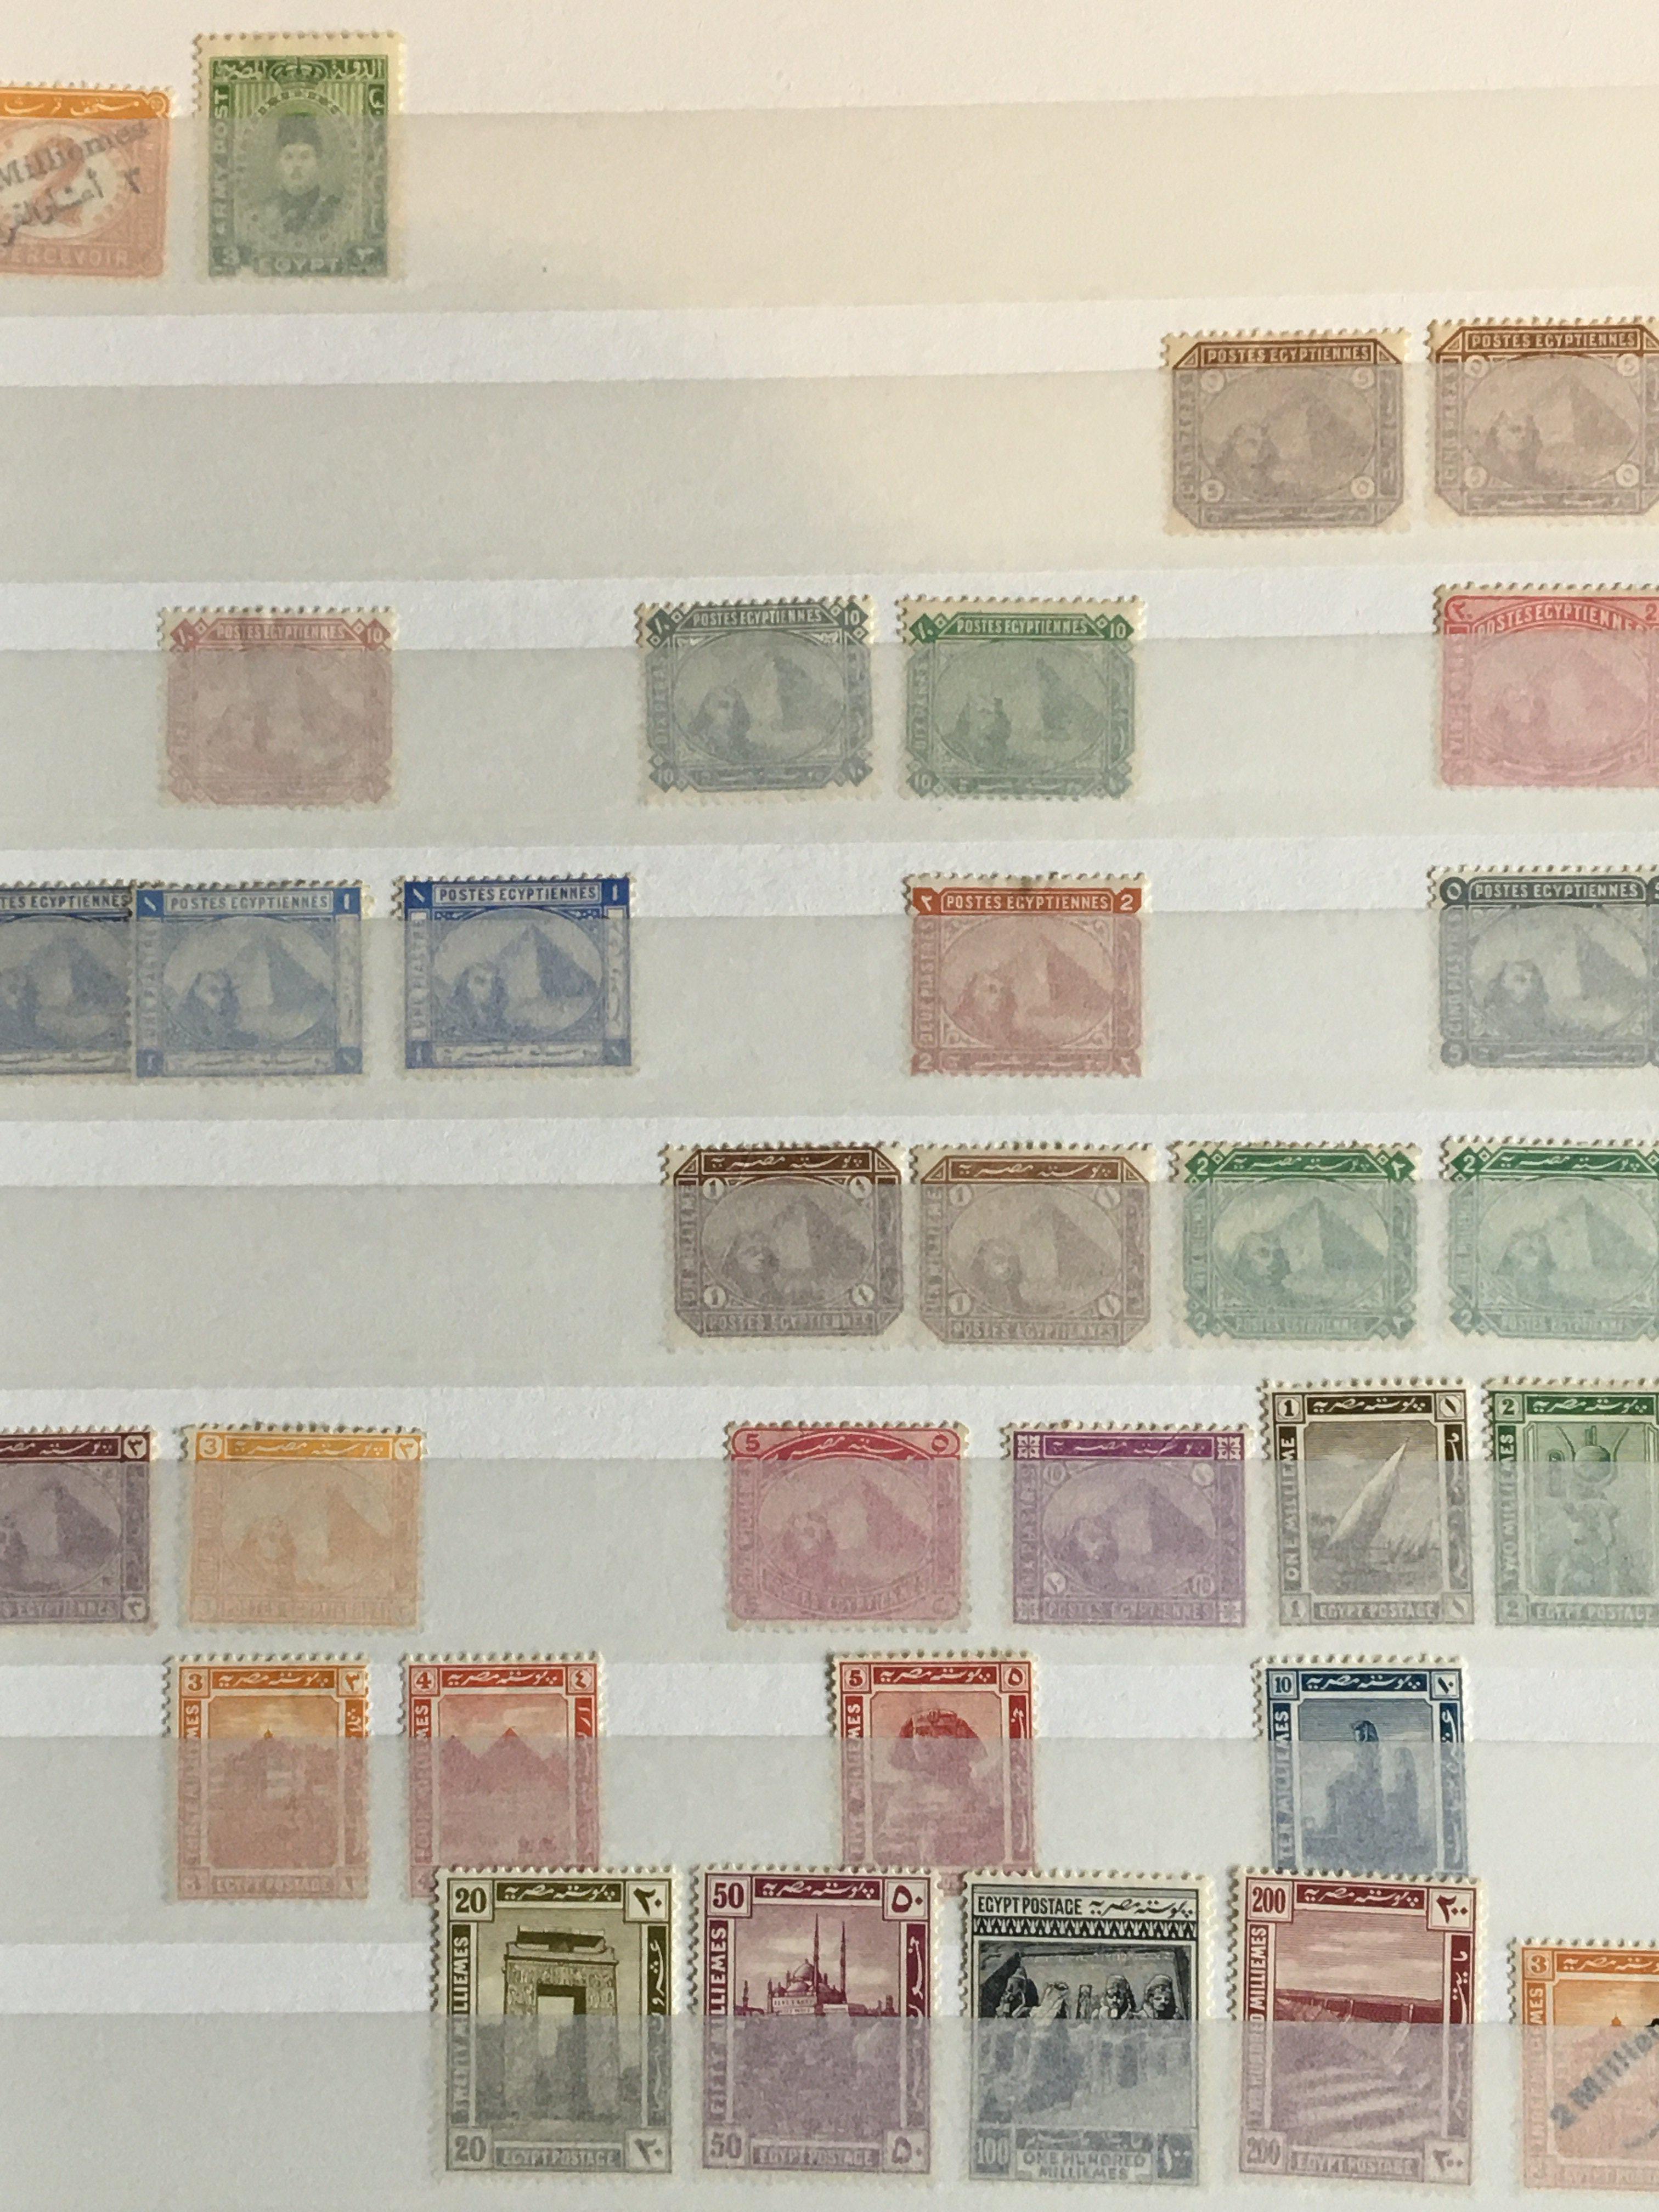 Six albums of stamps including an album of Egyptia